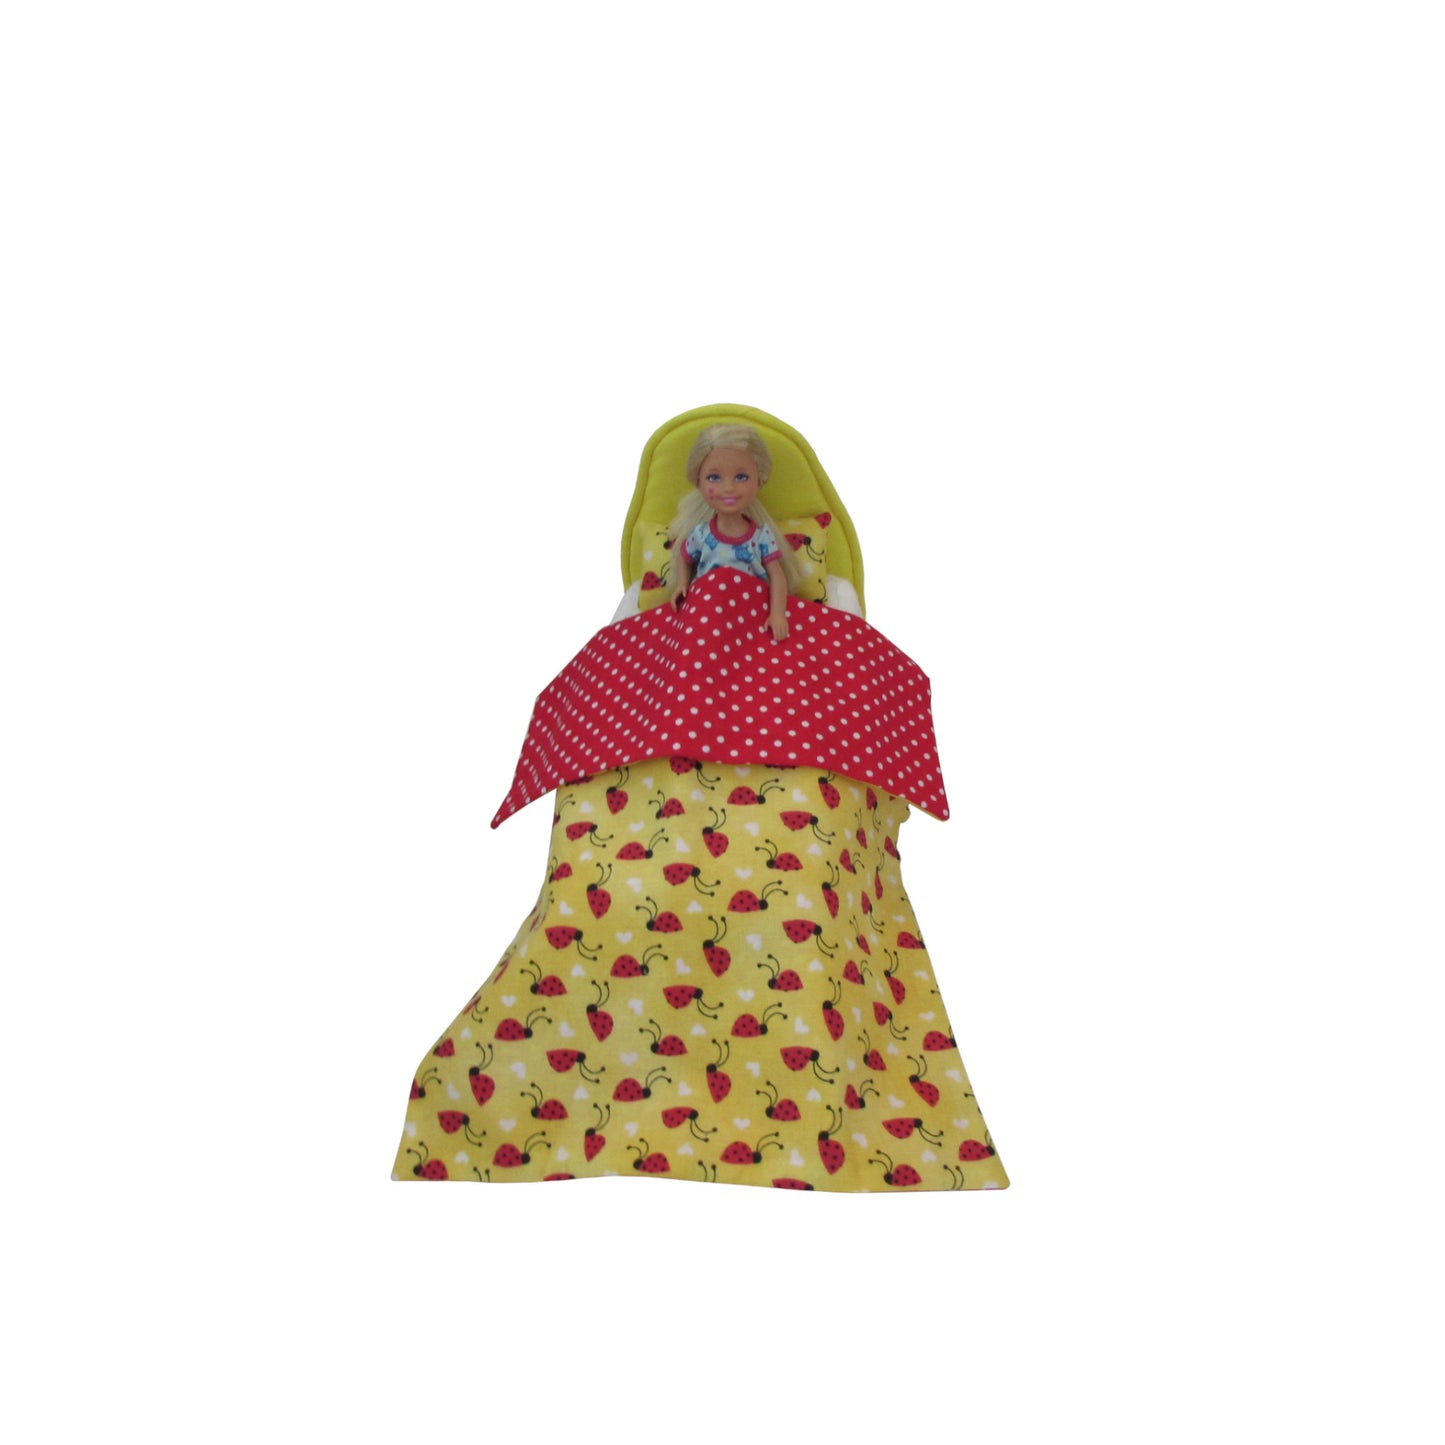 Bright Yellow Doll Bed and Reversible Ladybug Doll Bedding for 6.5-inch dolls with doll